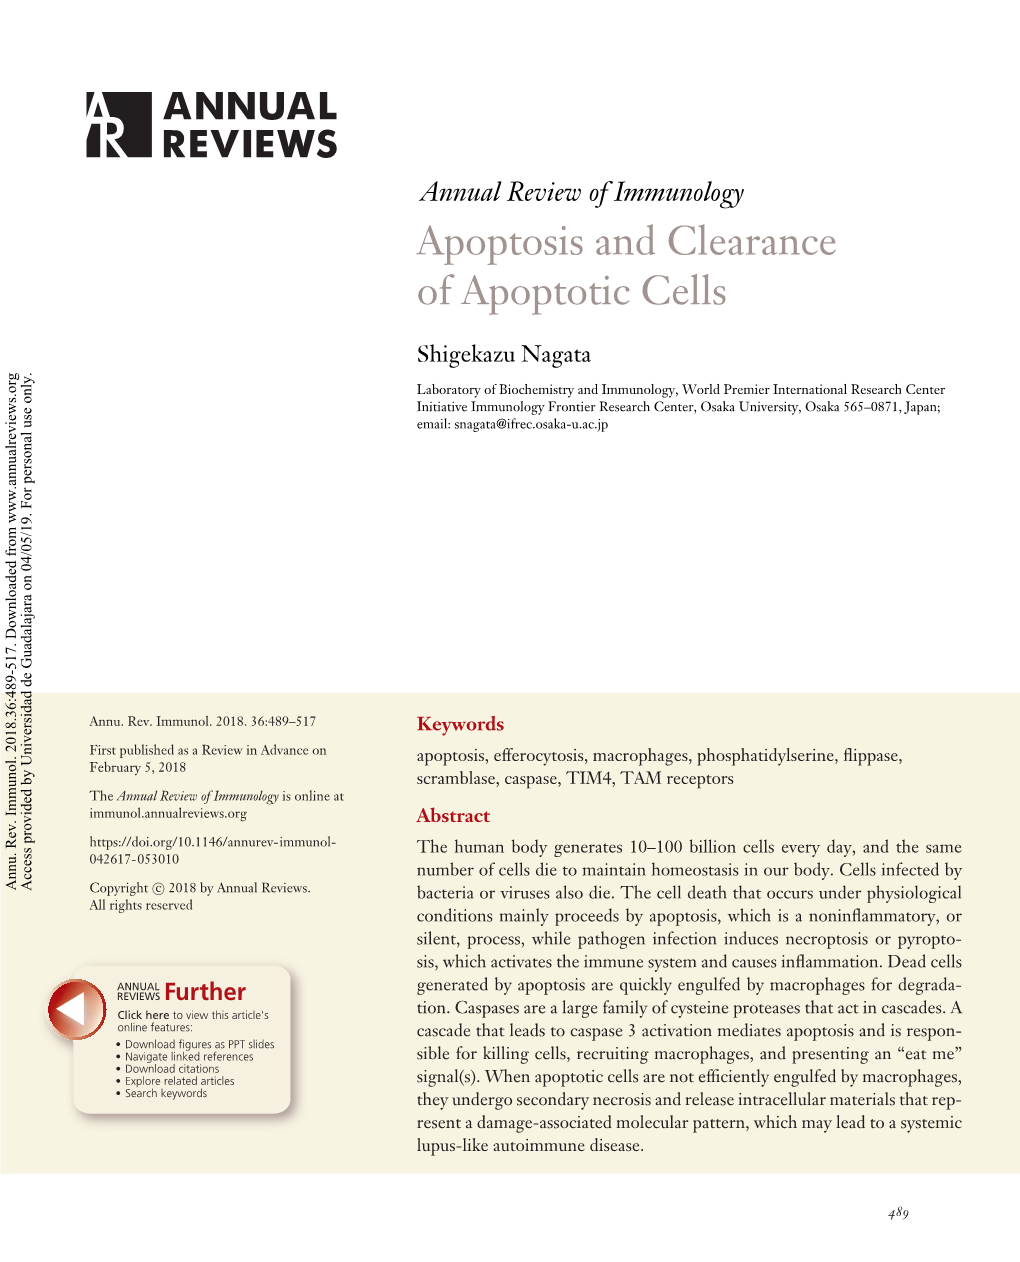 Apoptosis and Clearance of Apoptotic Cells